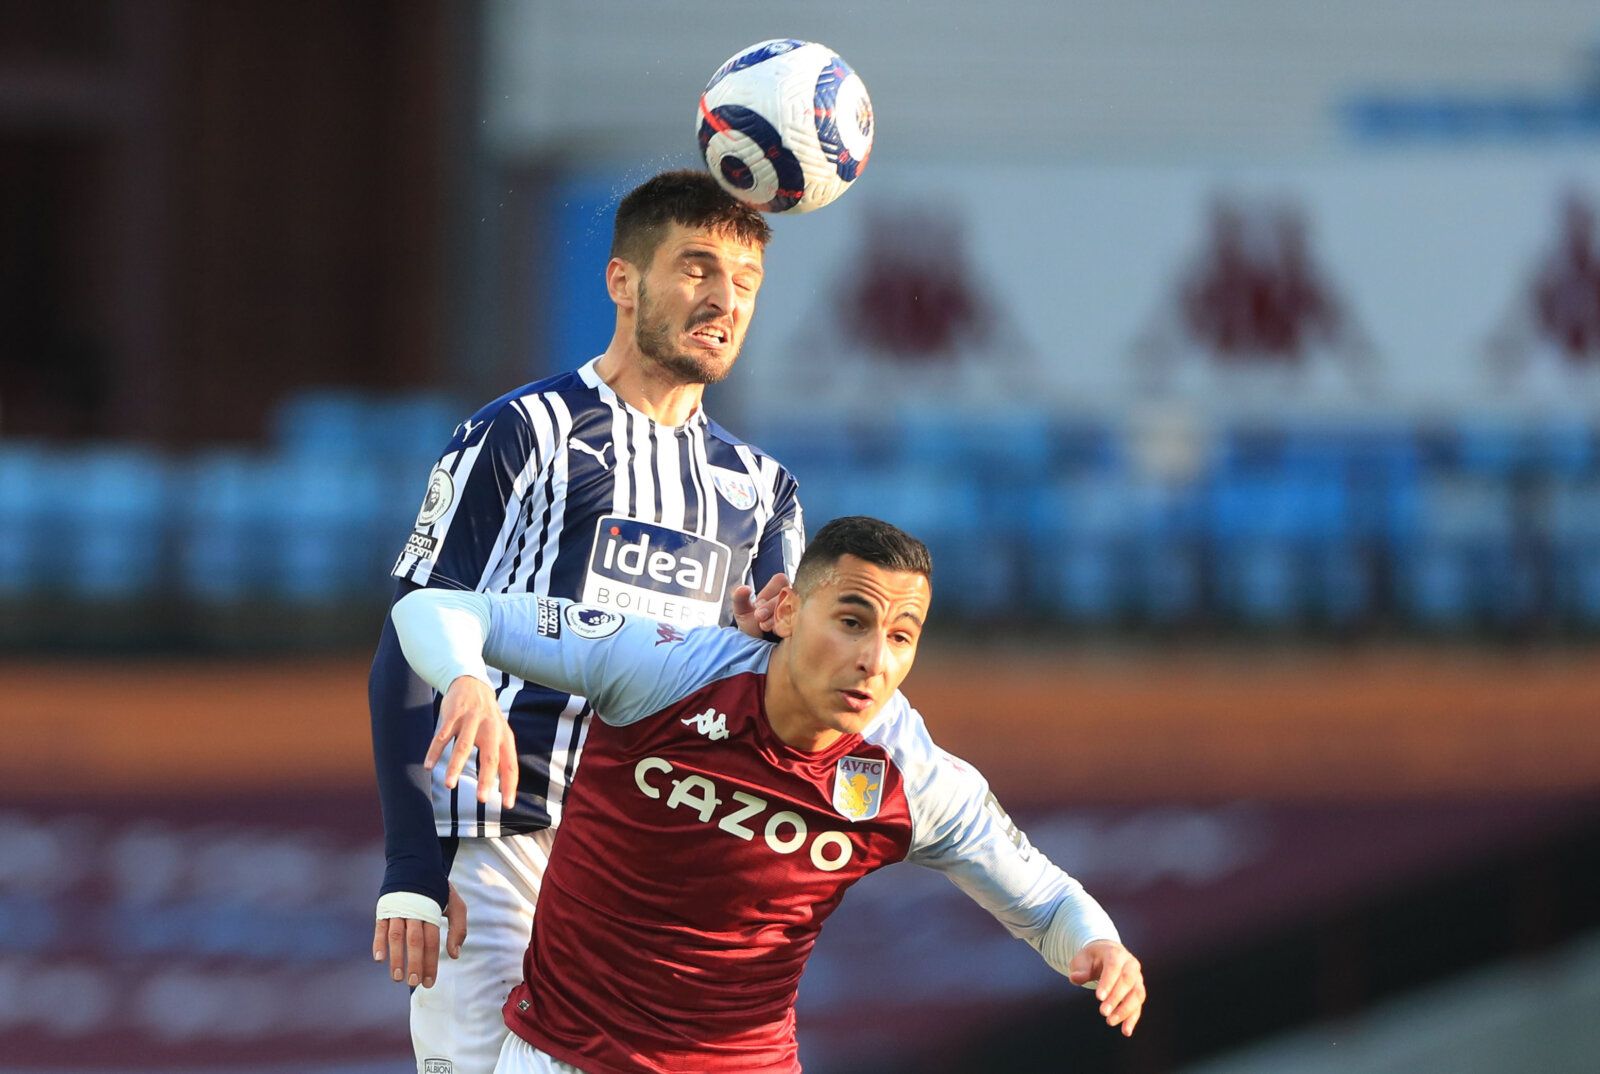 Soccer Football - Premier League - Aston Villa v West Bromwich Albion  - Villa Park, Birmingham, Britain - April 25, 2021 West Bromwich Albion's Okay Yokuslu in action with Aston Villa's Anwar El Ghazi Pool via REUTERS/Mike Egerton EDITORIAL USE ONLY. No use with unauthorized audio, video, data, fixture lists, club/league logos or 'live' services. Online in-match use limited to 75 images, no video emulation. No use in betting, games or single club /league/player publications.  Please contact you